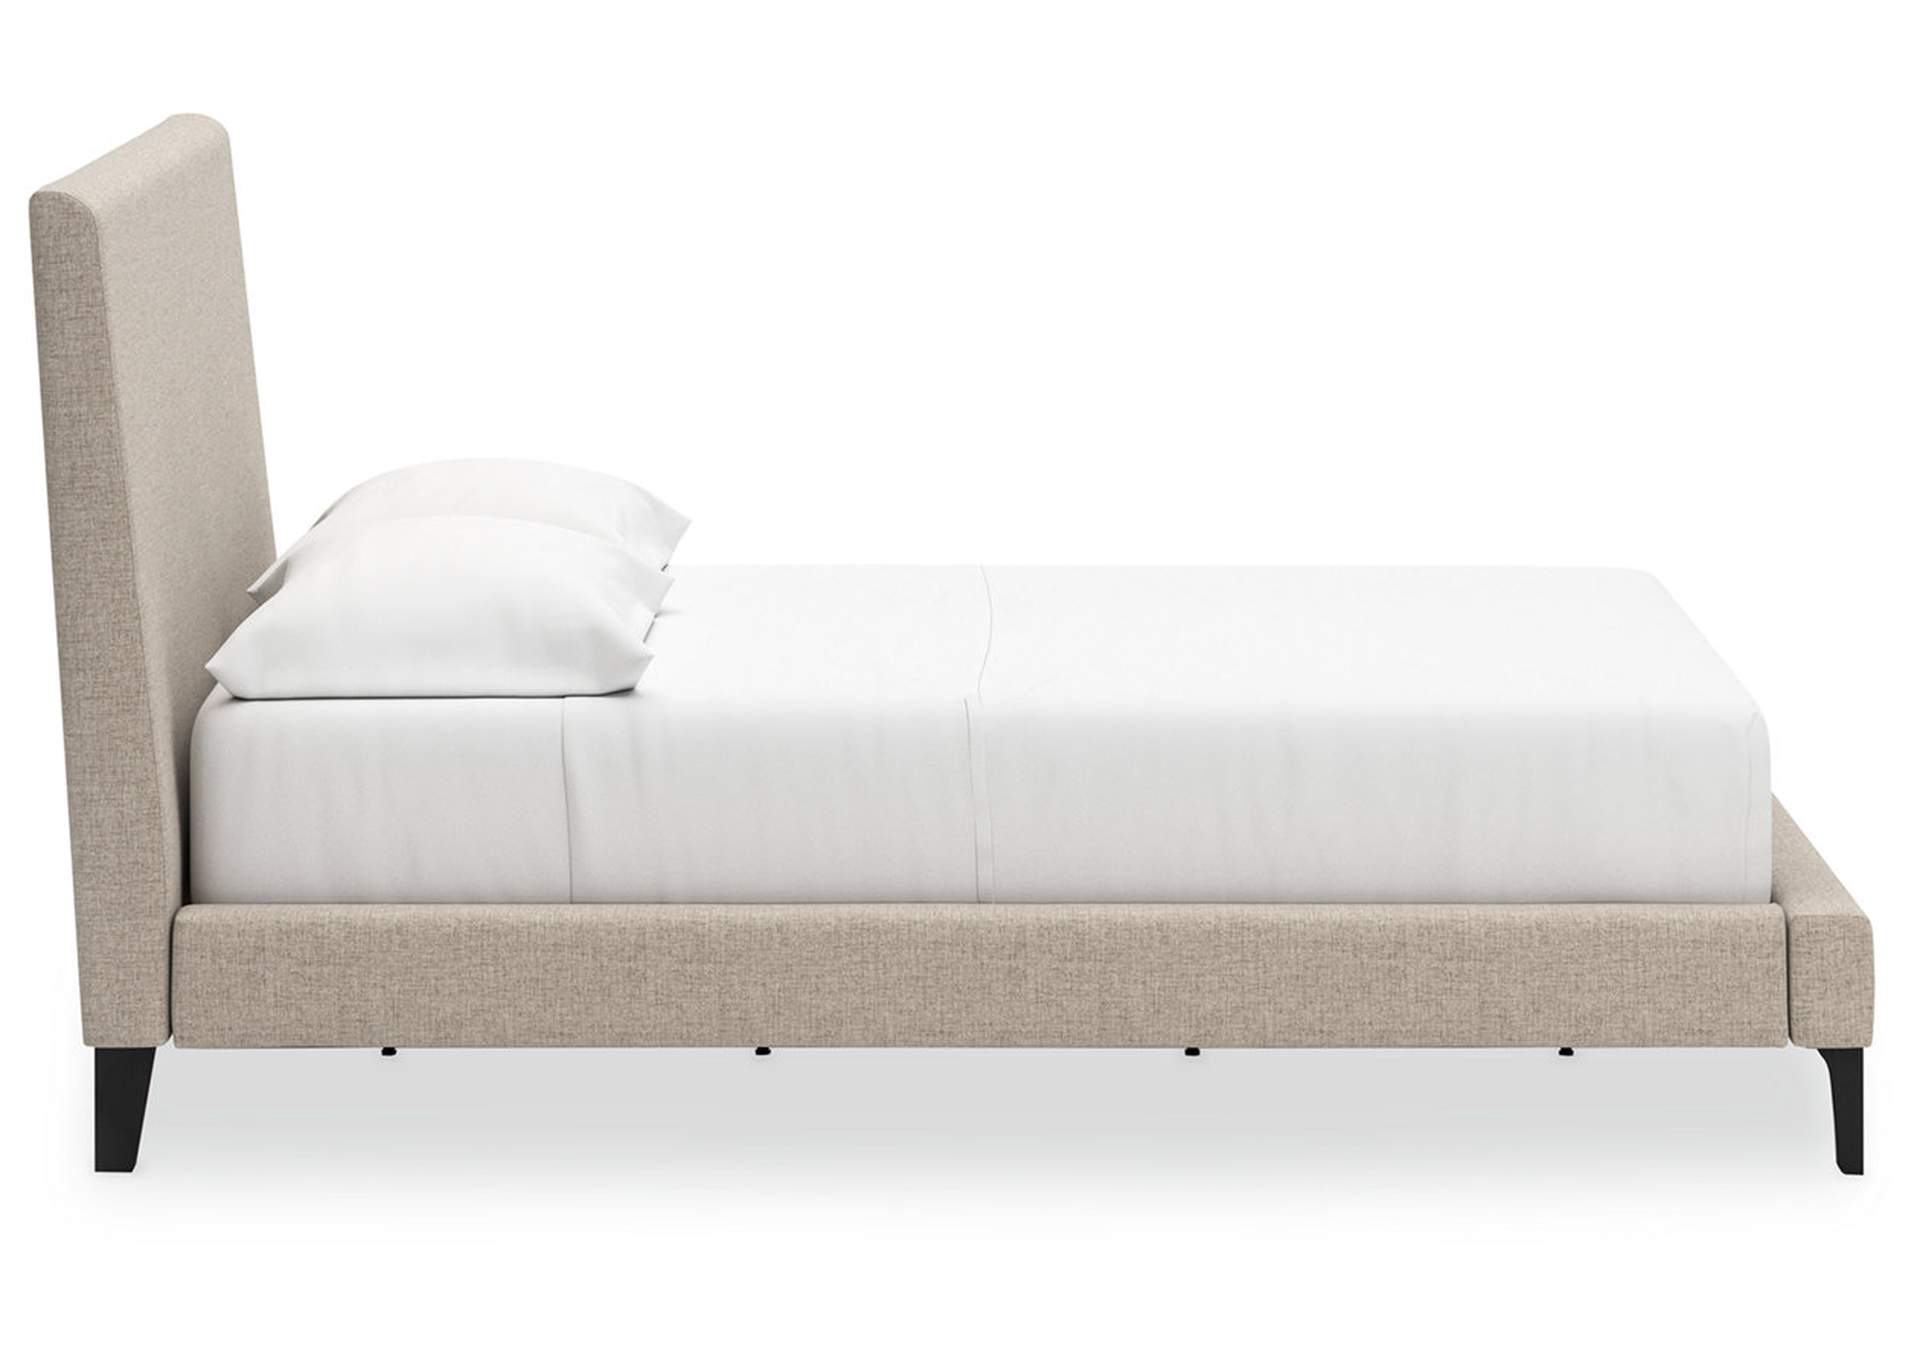 Cielden Full Upholstered Bed with Roll Slats,Signature Design By Ashley